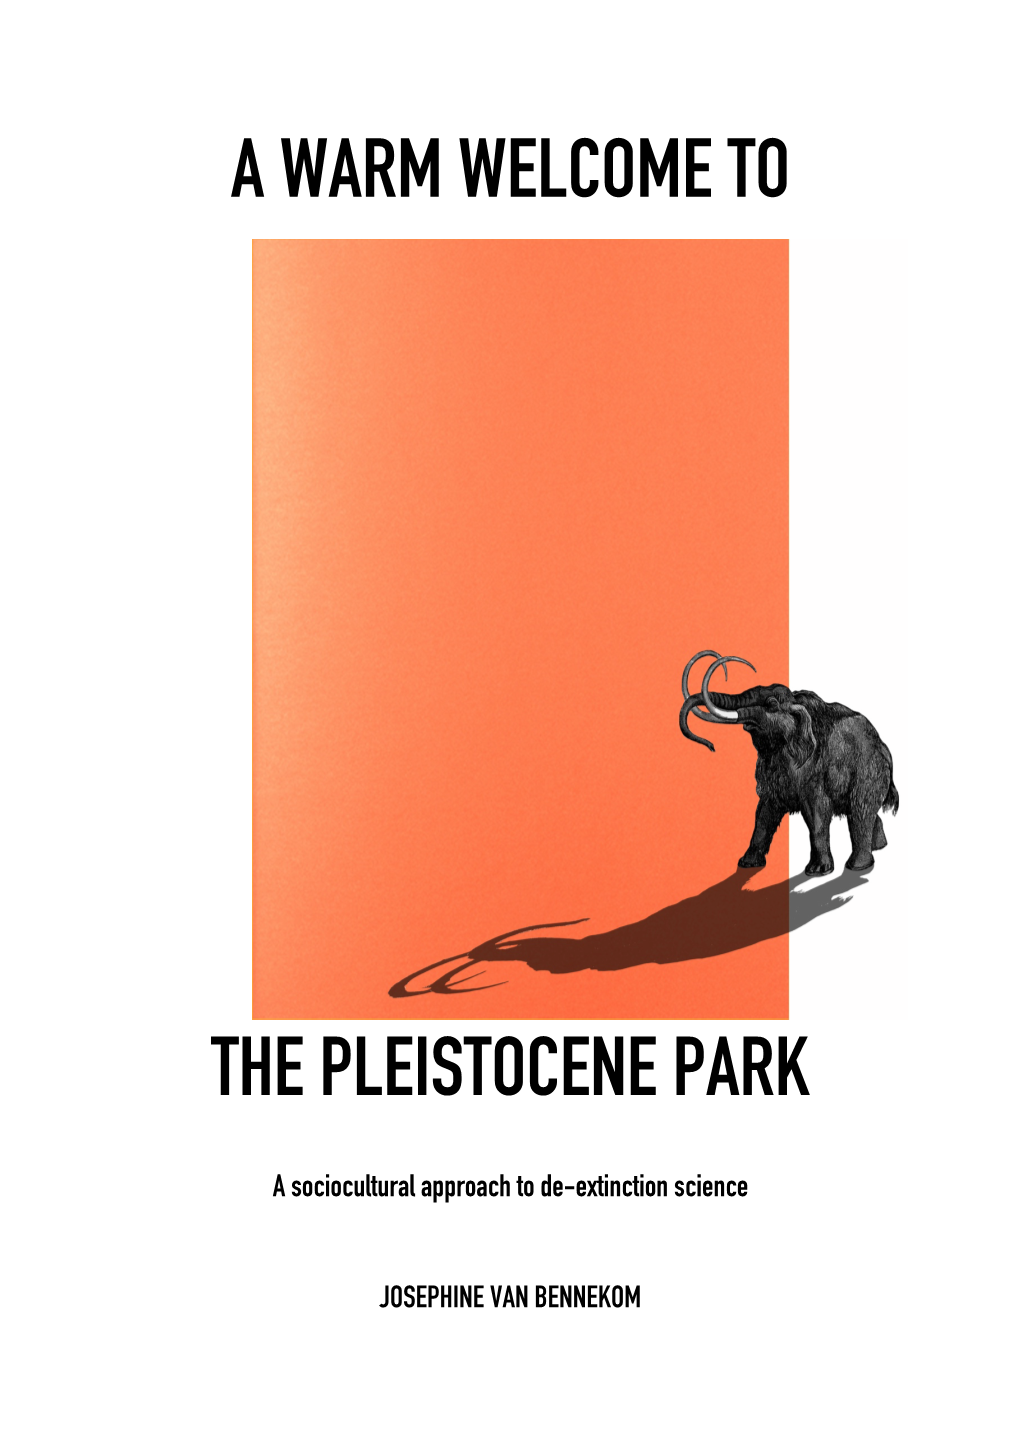 A WARM WELCOME to the PLEISTOCENE PARK: a Sociocultural Approach to De-Extinction Science